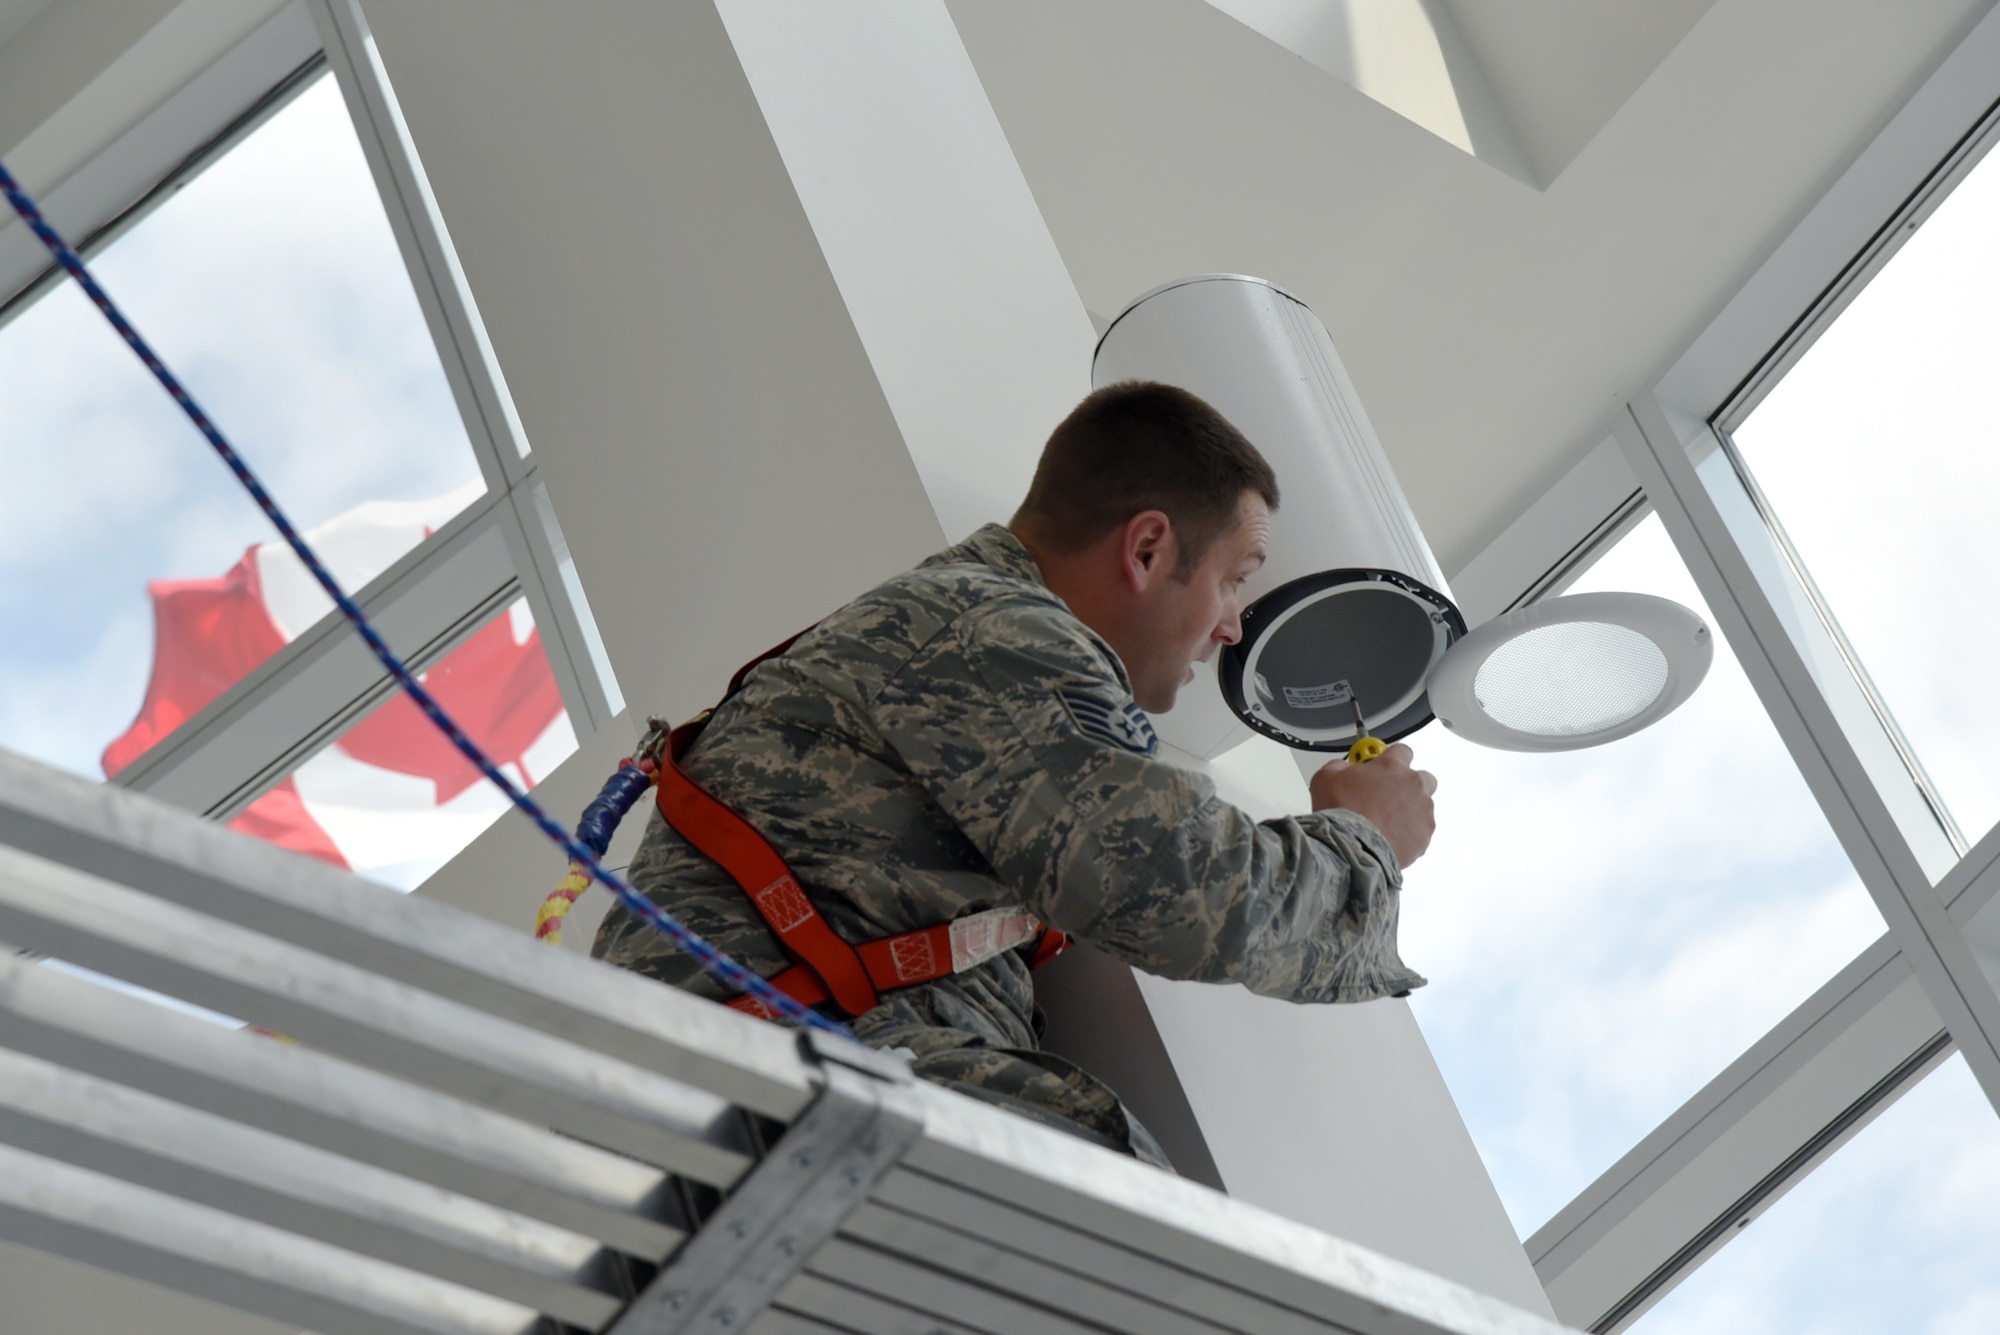 Oregon Air National Guard Christoper Black, assigned to the 142nd Fighter Wing Civil Engineer Squadron (CES) works to install new lights at the Joint Task Force North (JTFN) Headquarters building, Yellowknife, Northwest Territories, Canada, July 21, 2017. The Oregon CES members are deployed for two-weeks for training along with CAF members from Cold Lake, Alberta. (U.S. Air National Guard photo/Master Sgt. John Hughel, 142nd Fighter Wing Public Affairs)